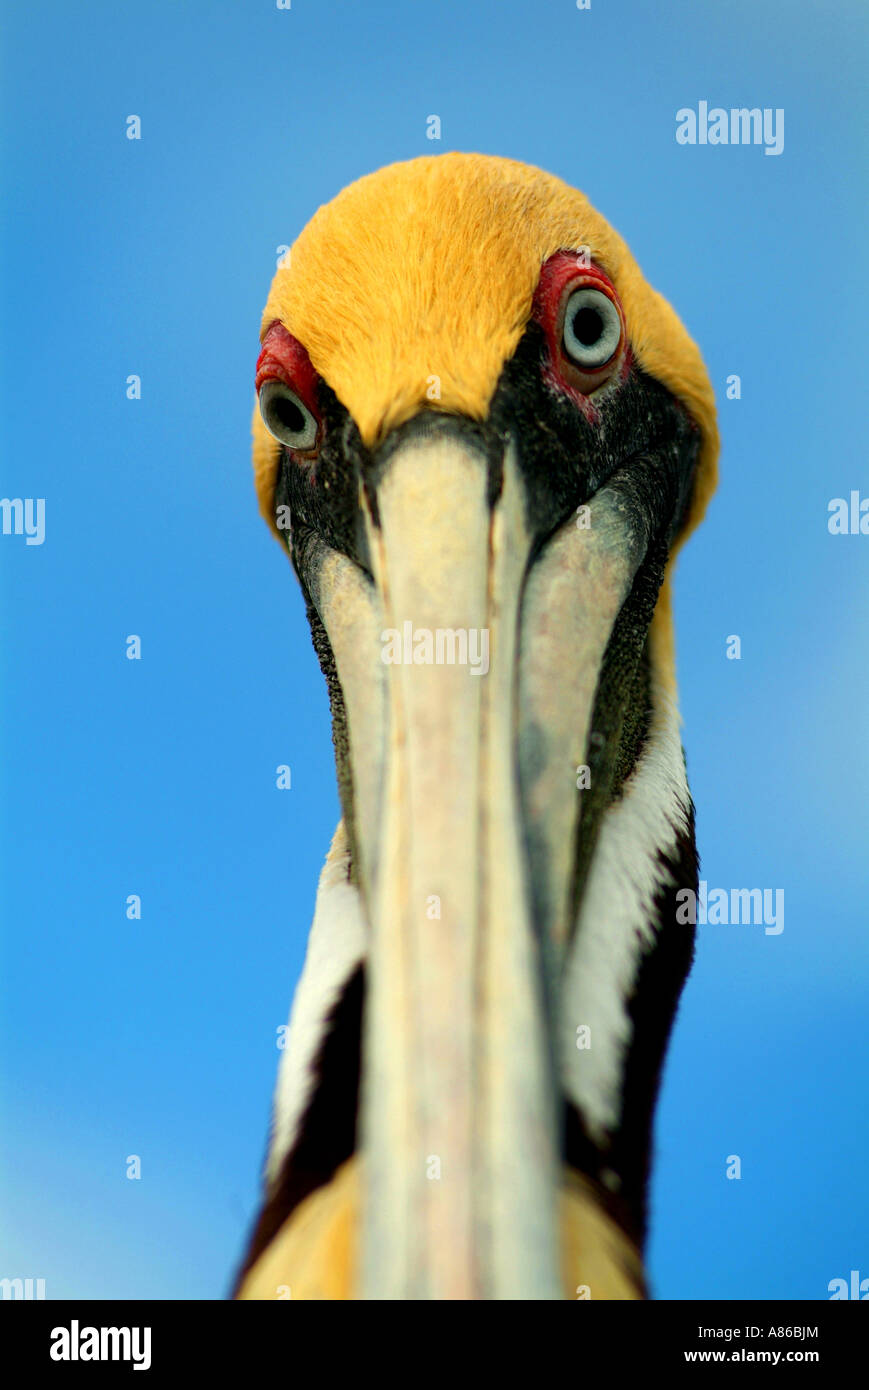 The Florida Keys Wild Bird Center attracts many varieties of wild shore birds including the white ibis Brown Pelican Stock Photo